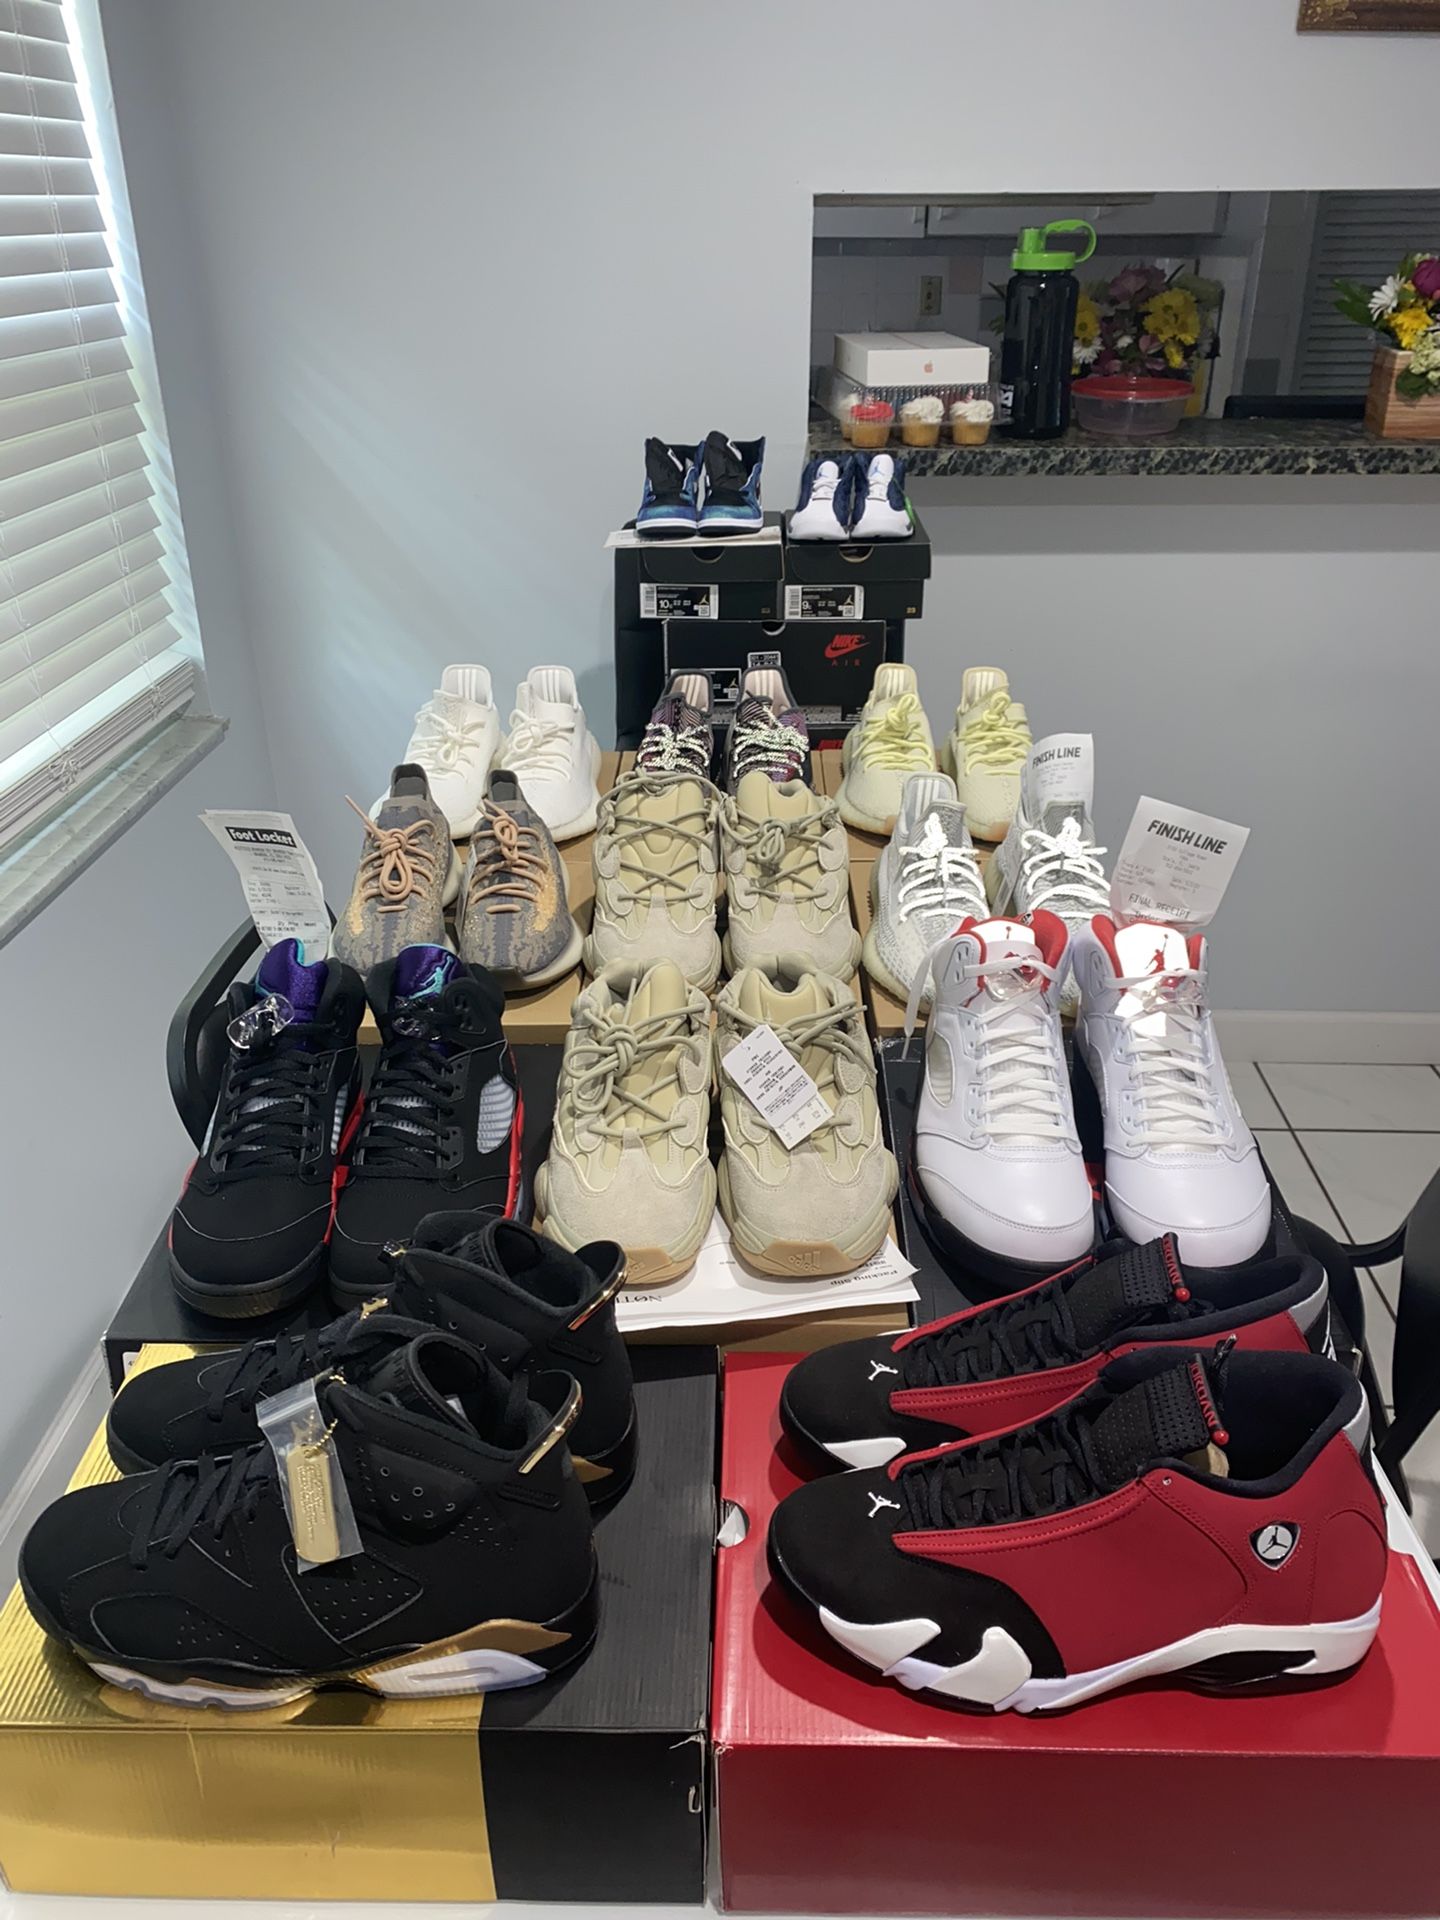 Yeezy And Air Jordan Collection All DS Sizes 8-11.5 All Comes W/ Receipts